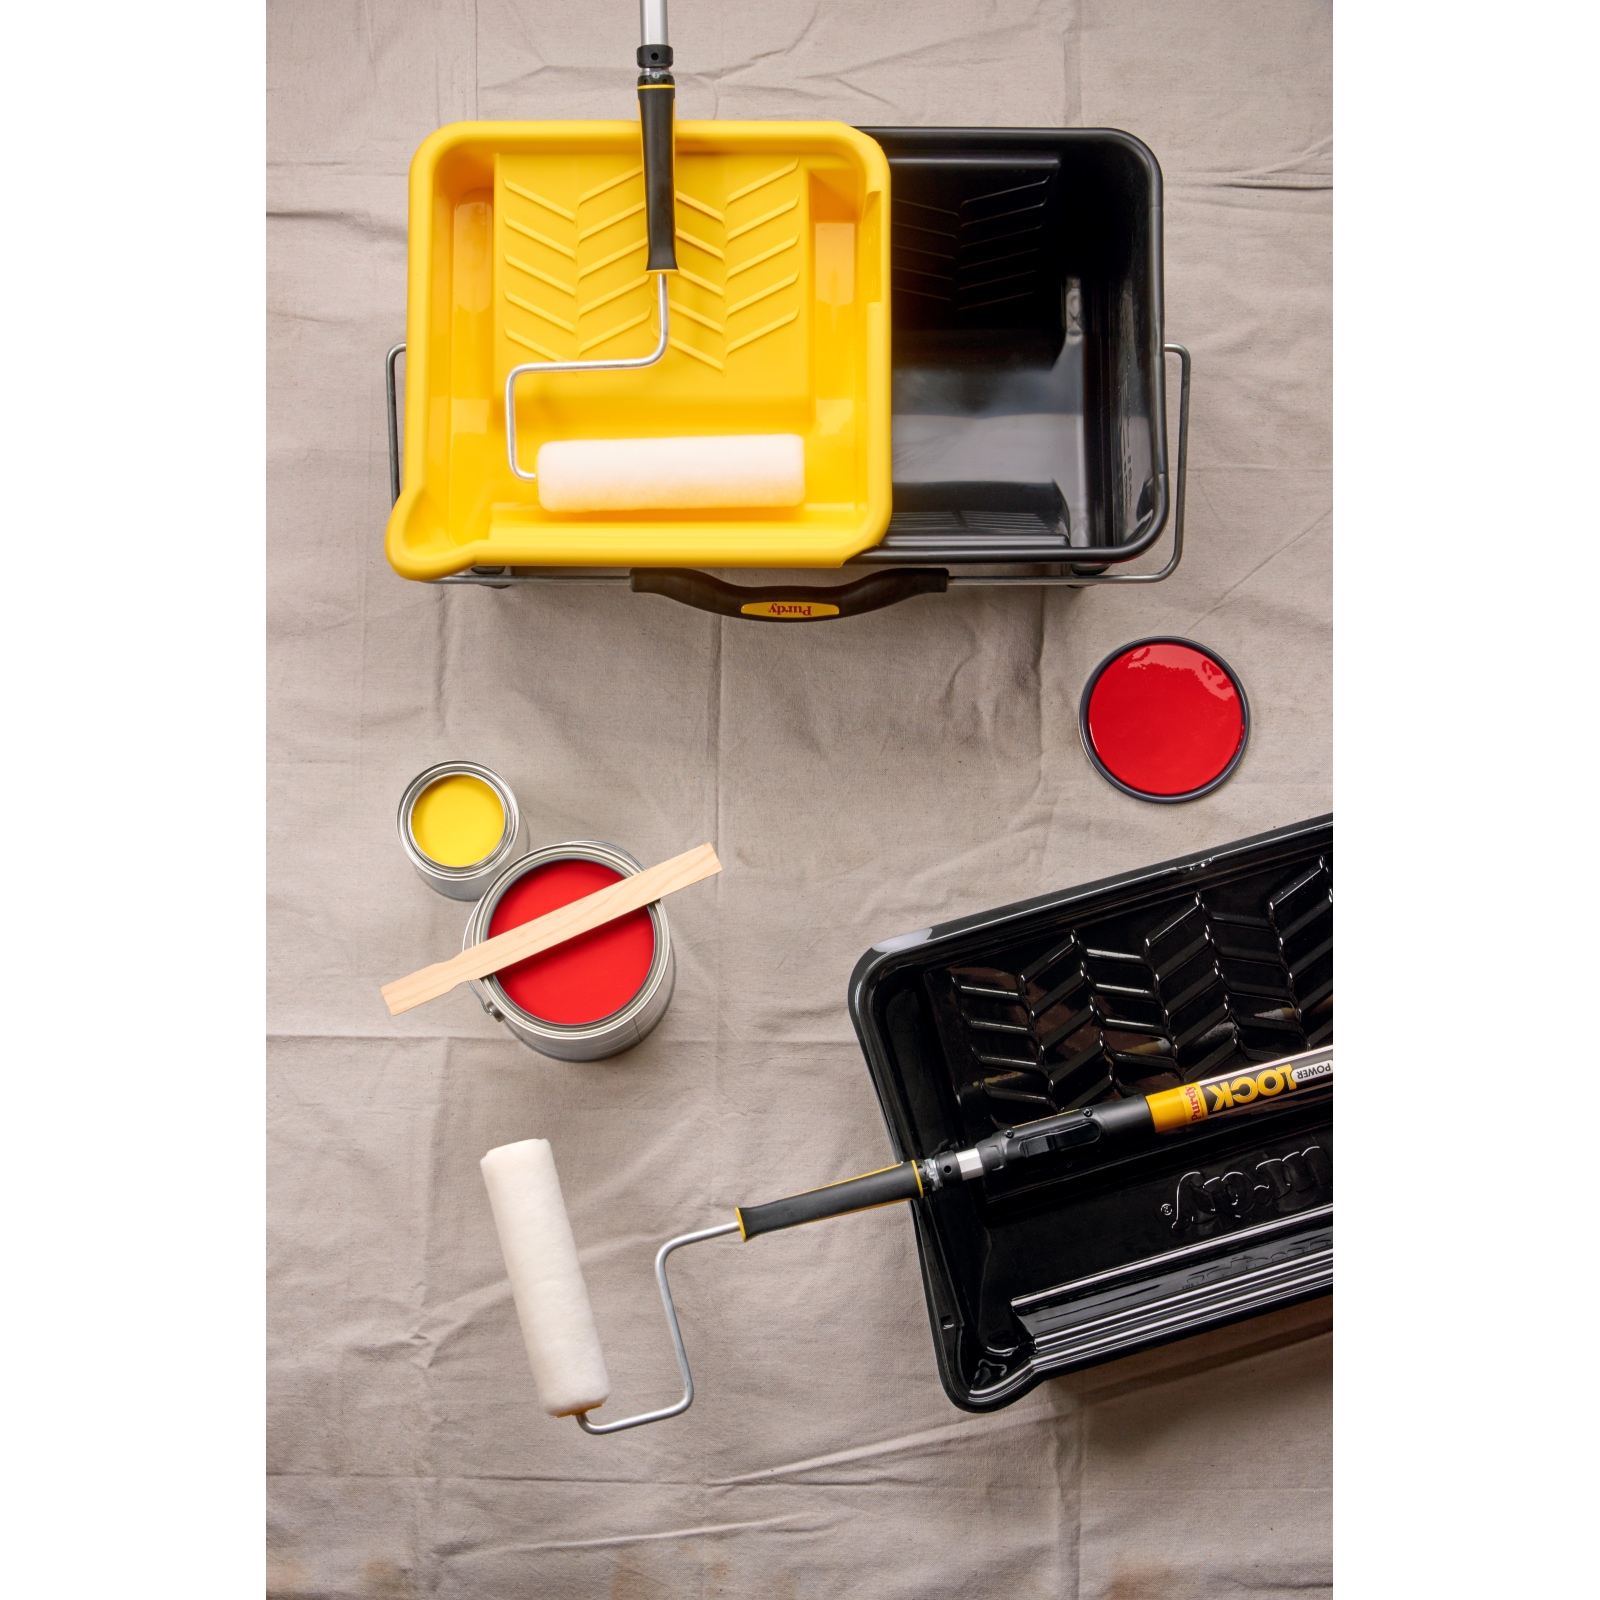 Purdy Nest 18 in. Paint Tray